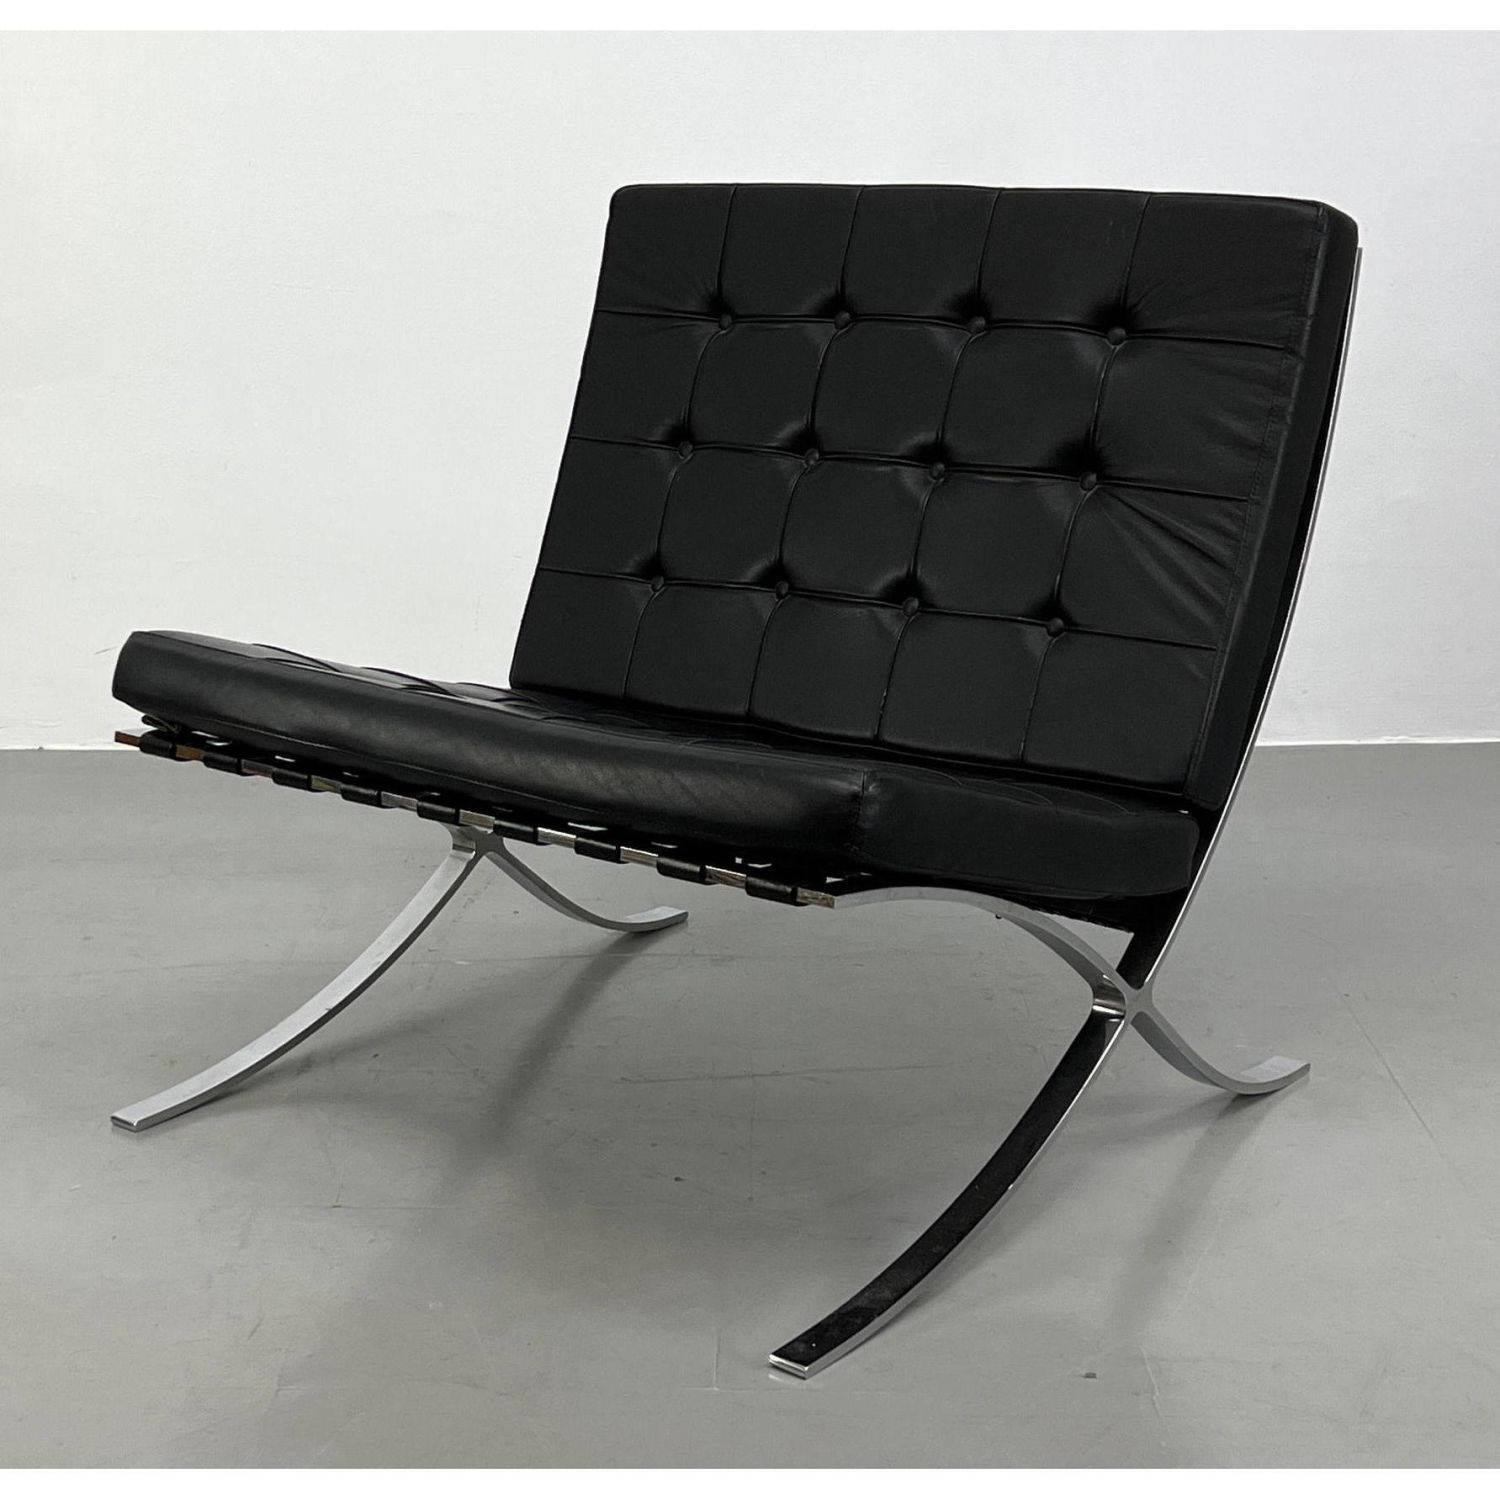 Barcelona Style lounge chair in 2b949f